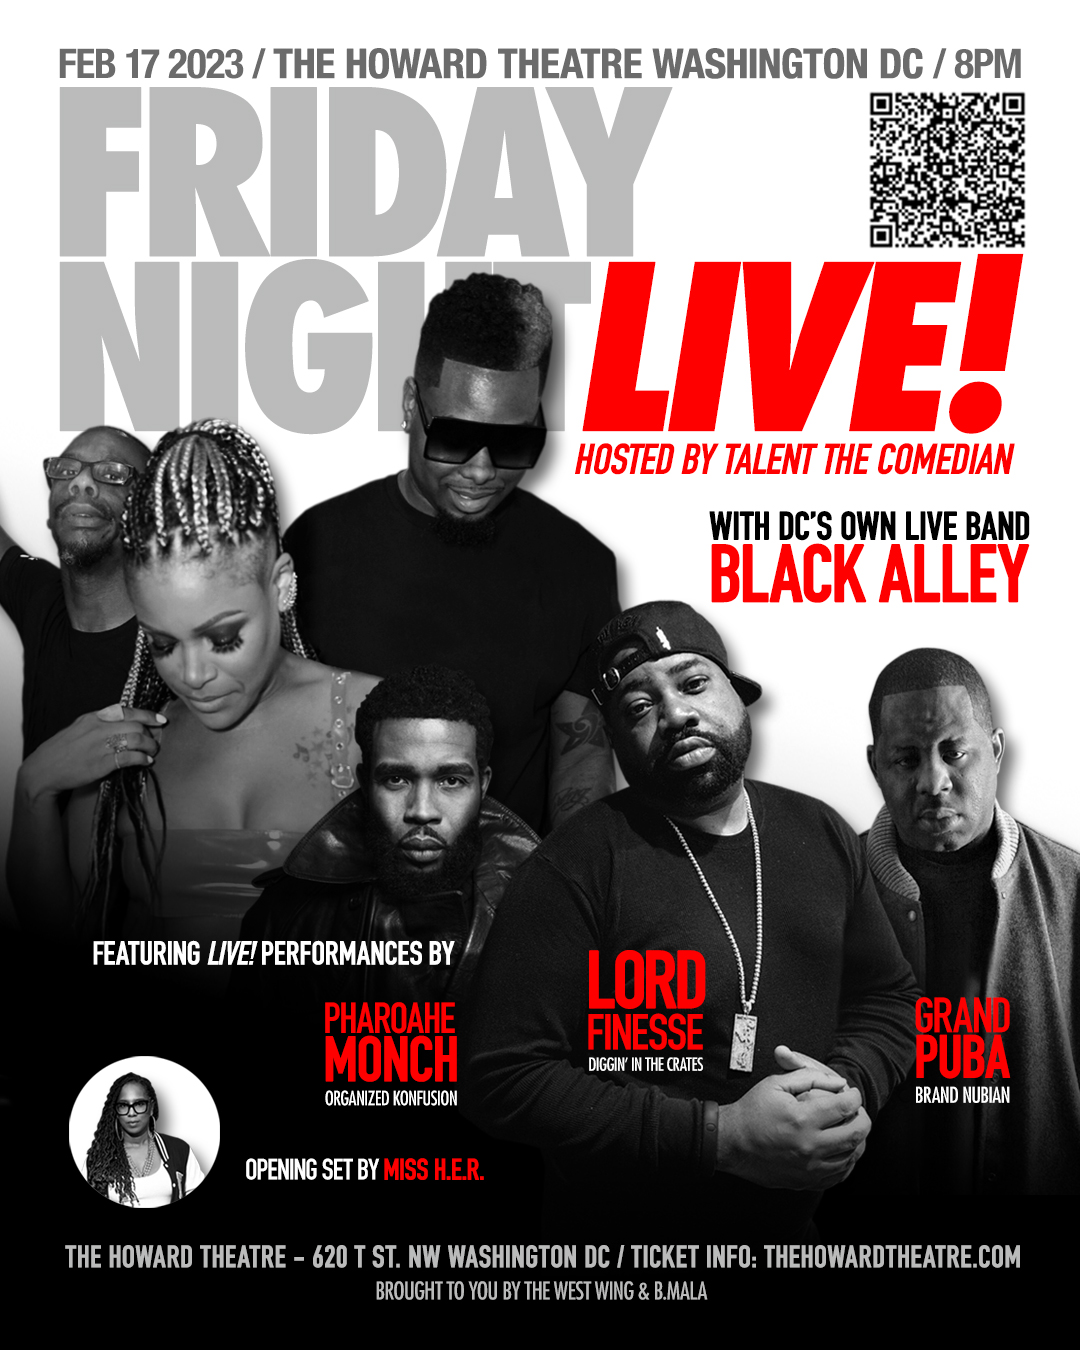 Black Alley Performing Live with Lord Finesse + Pharoahe Monch + Grand Puba